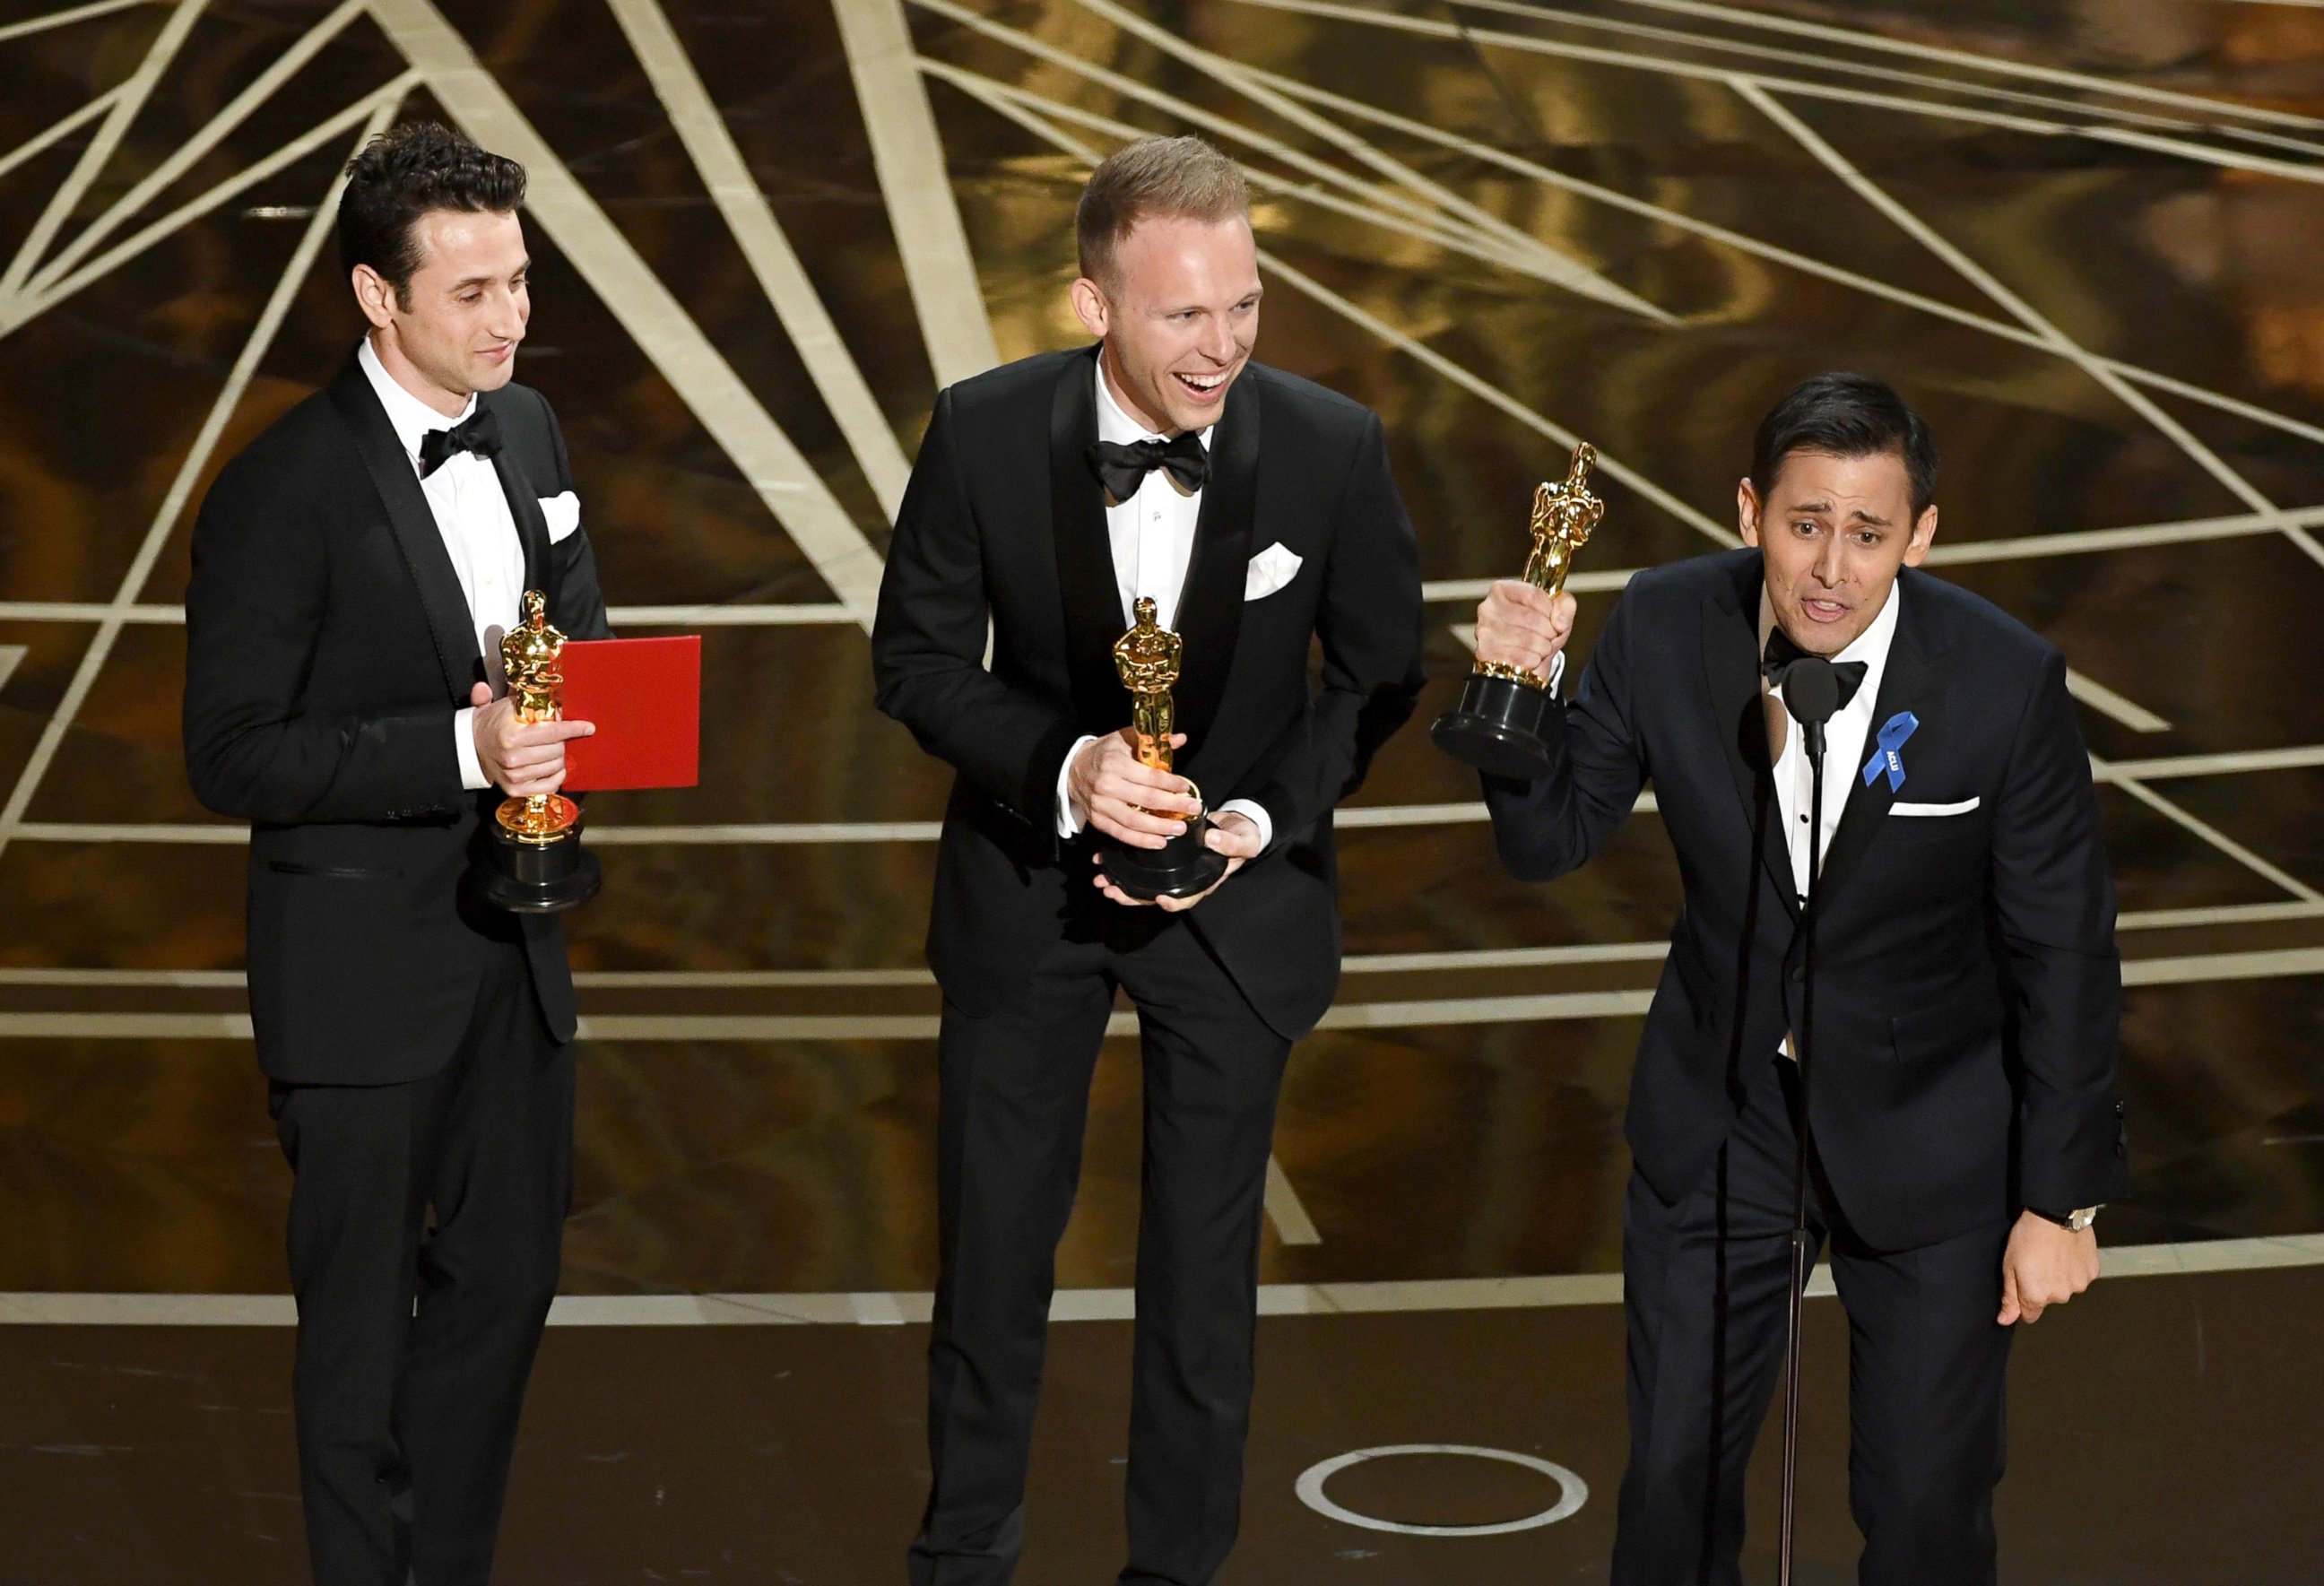 PHOTO: Songwriters Justin Hurwitz, Justin Paul and Benj Pasek accept Best Original Song for 'City of Stars' from 'La La Land' at the Academy Awards, Feb. 26, 2017 in Hollywood, Calif. 